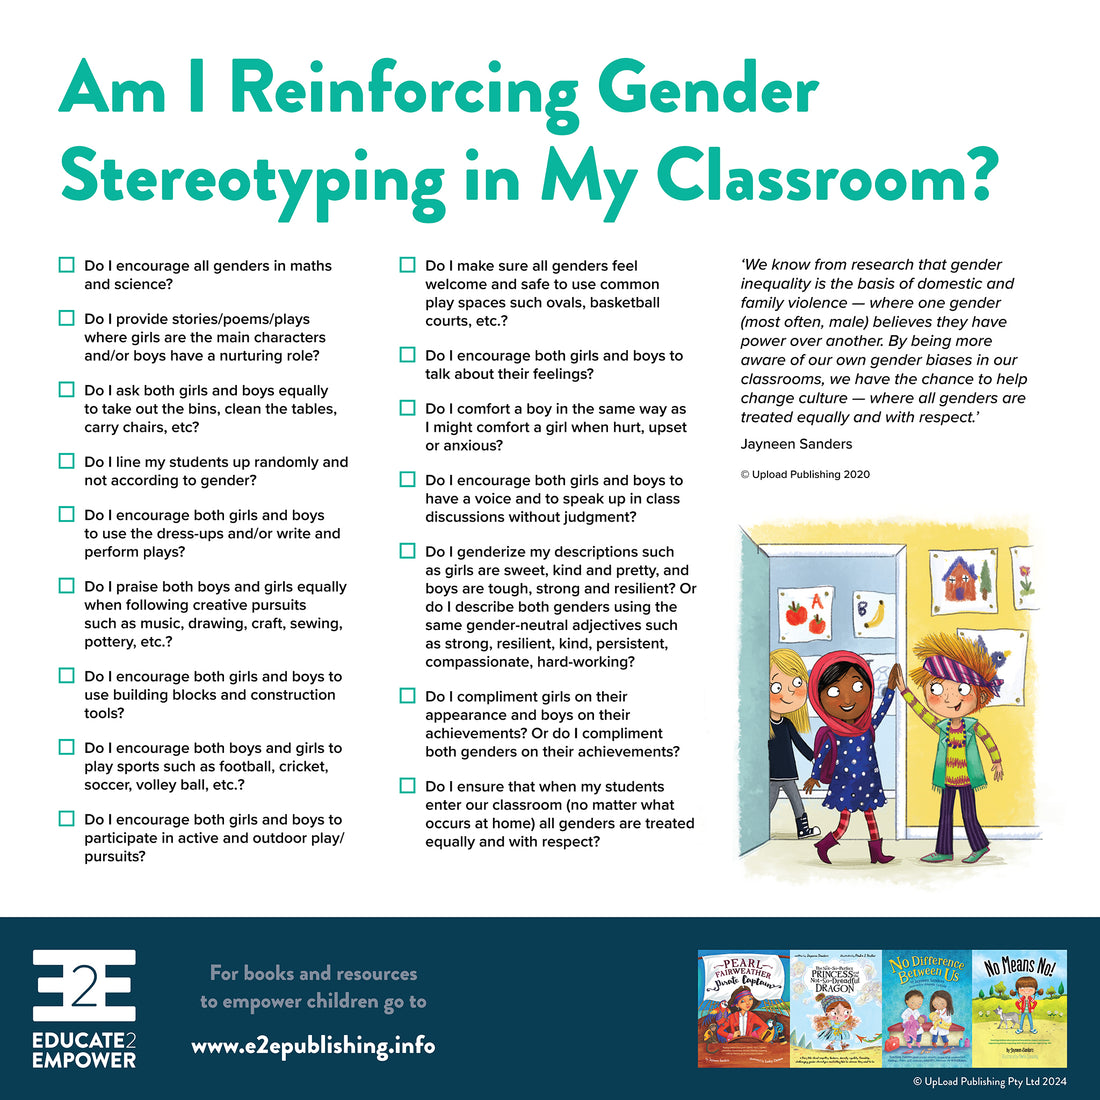 Am I Reinforcing Gender Stereotyping in My Classroom?